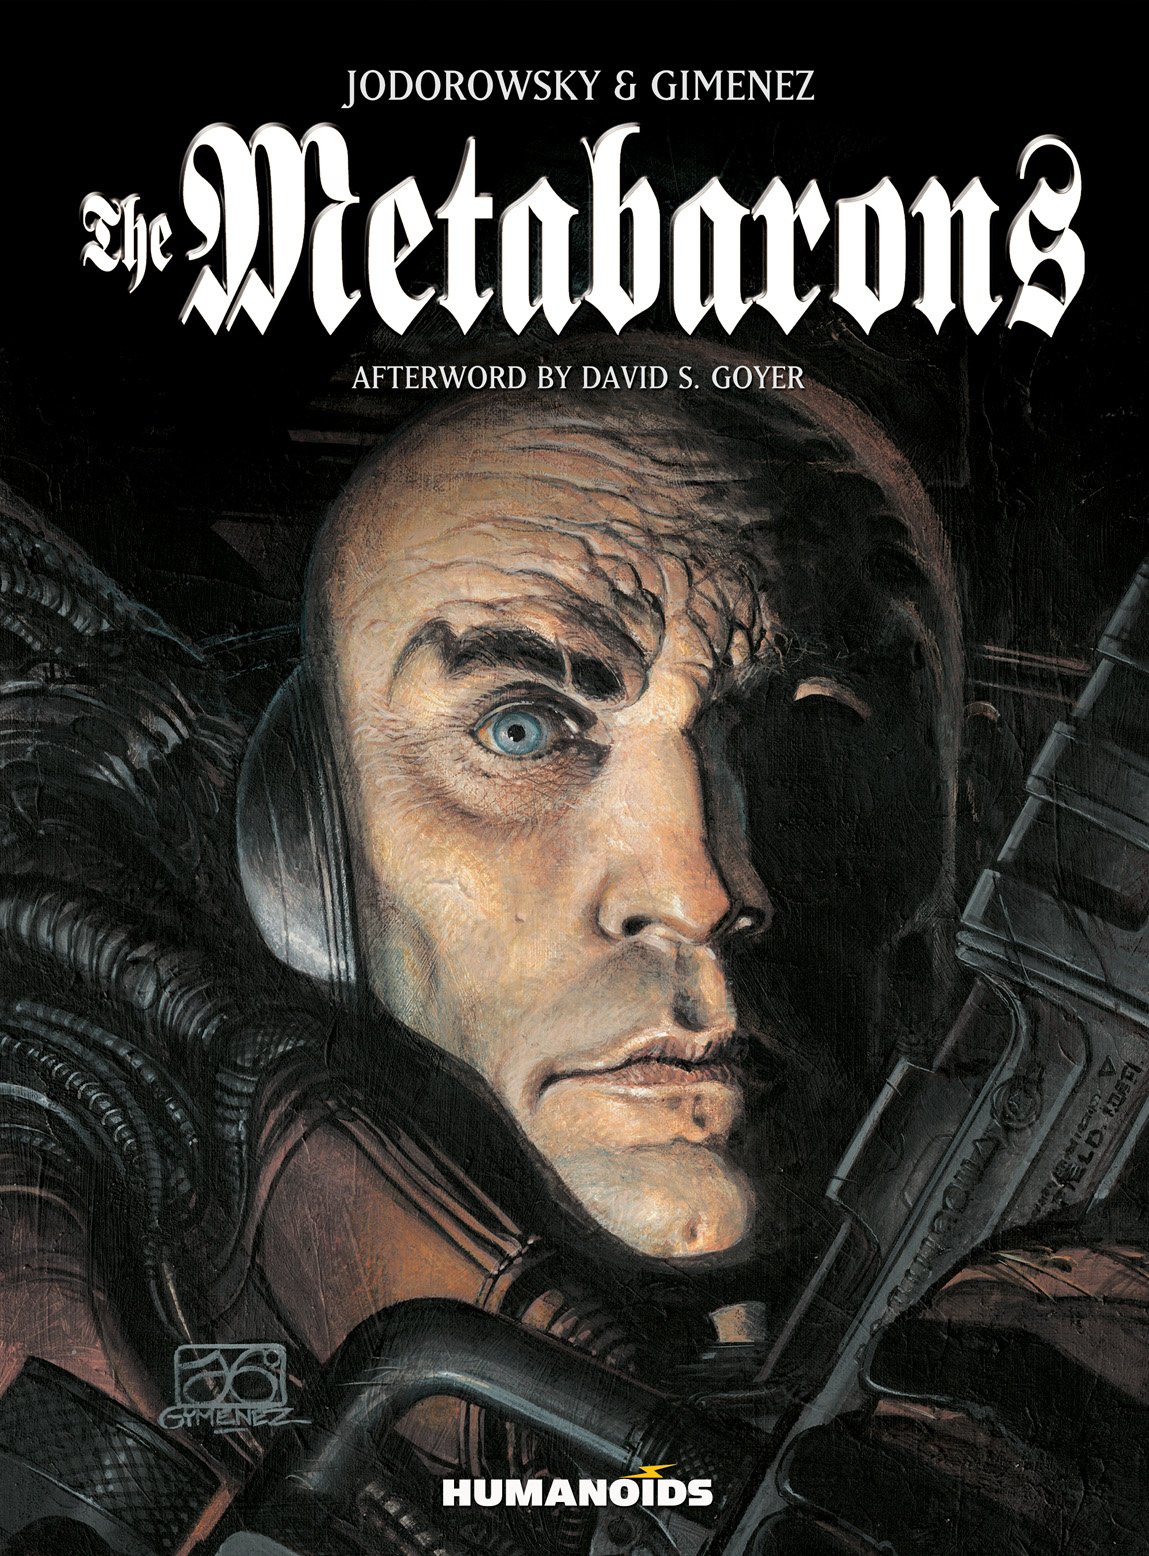 The Metabarons Hardcover